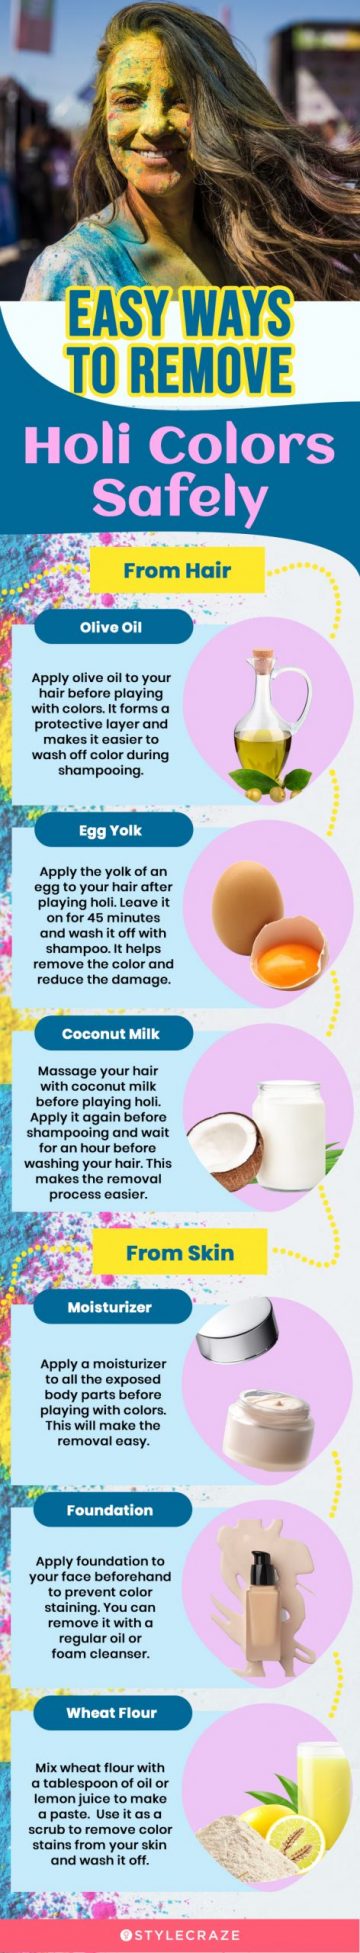 easy ways to remove holi colors safely (infographic)